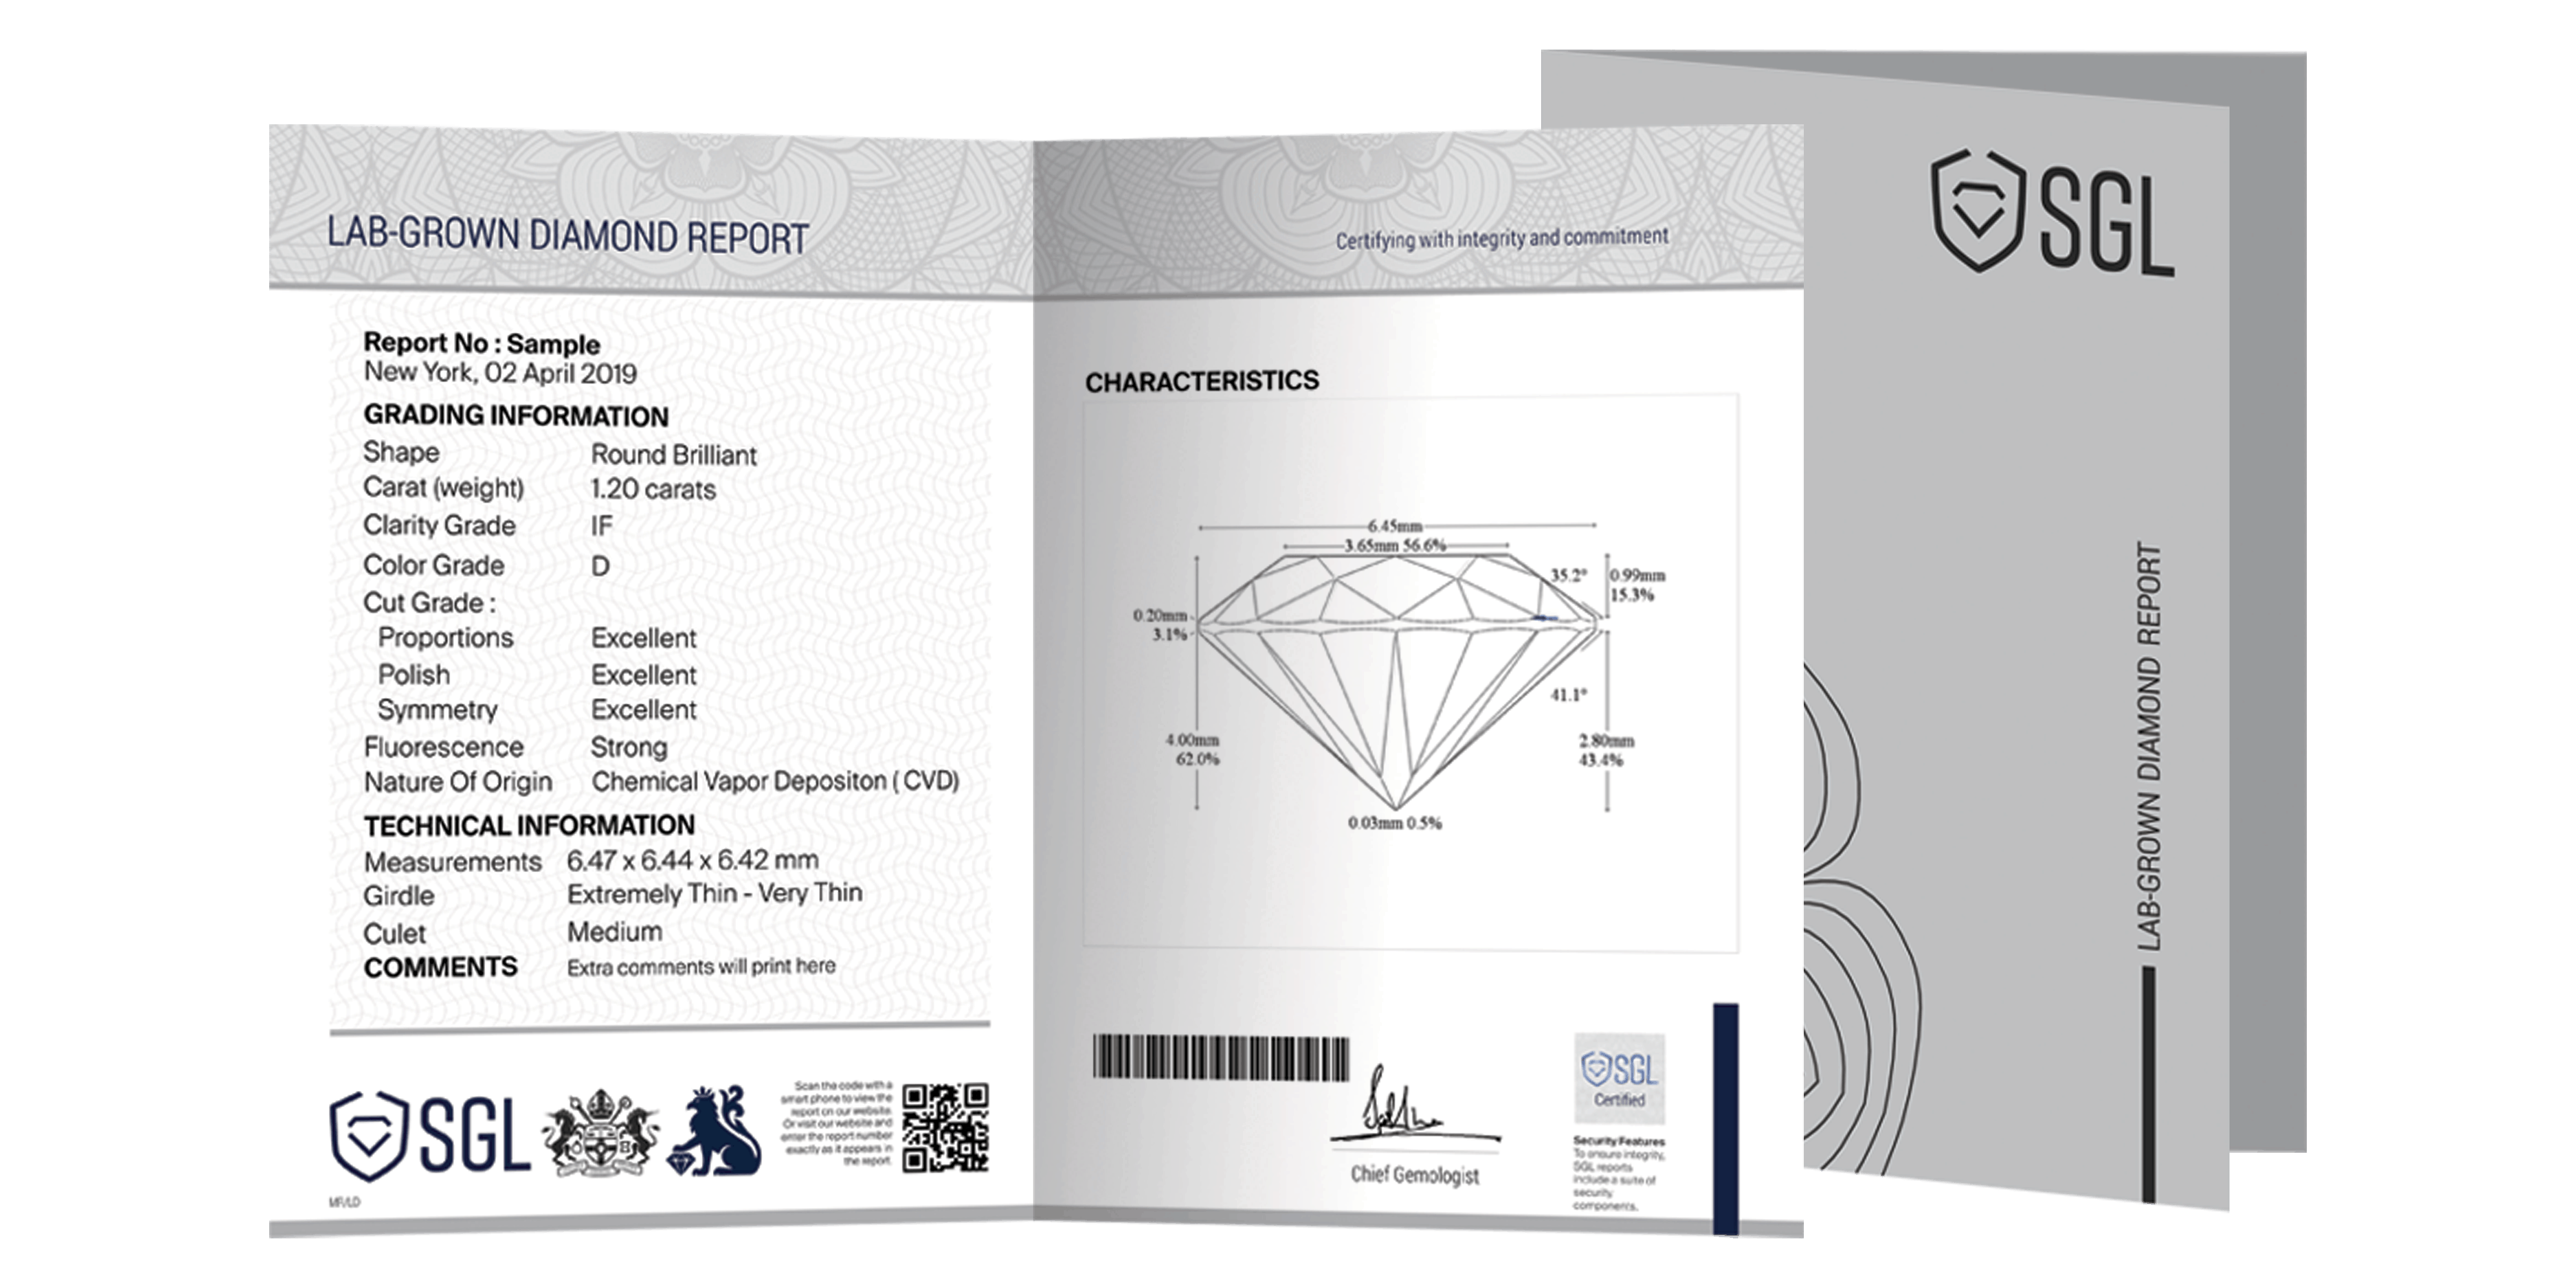 The image is of a lab grown diamond certificate provided by SGL labs. It also shows the different attributes and a detailed information of the characteristics of the diamond.